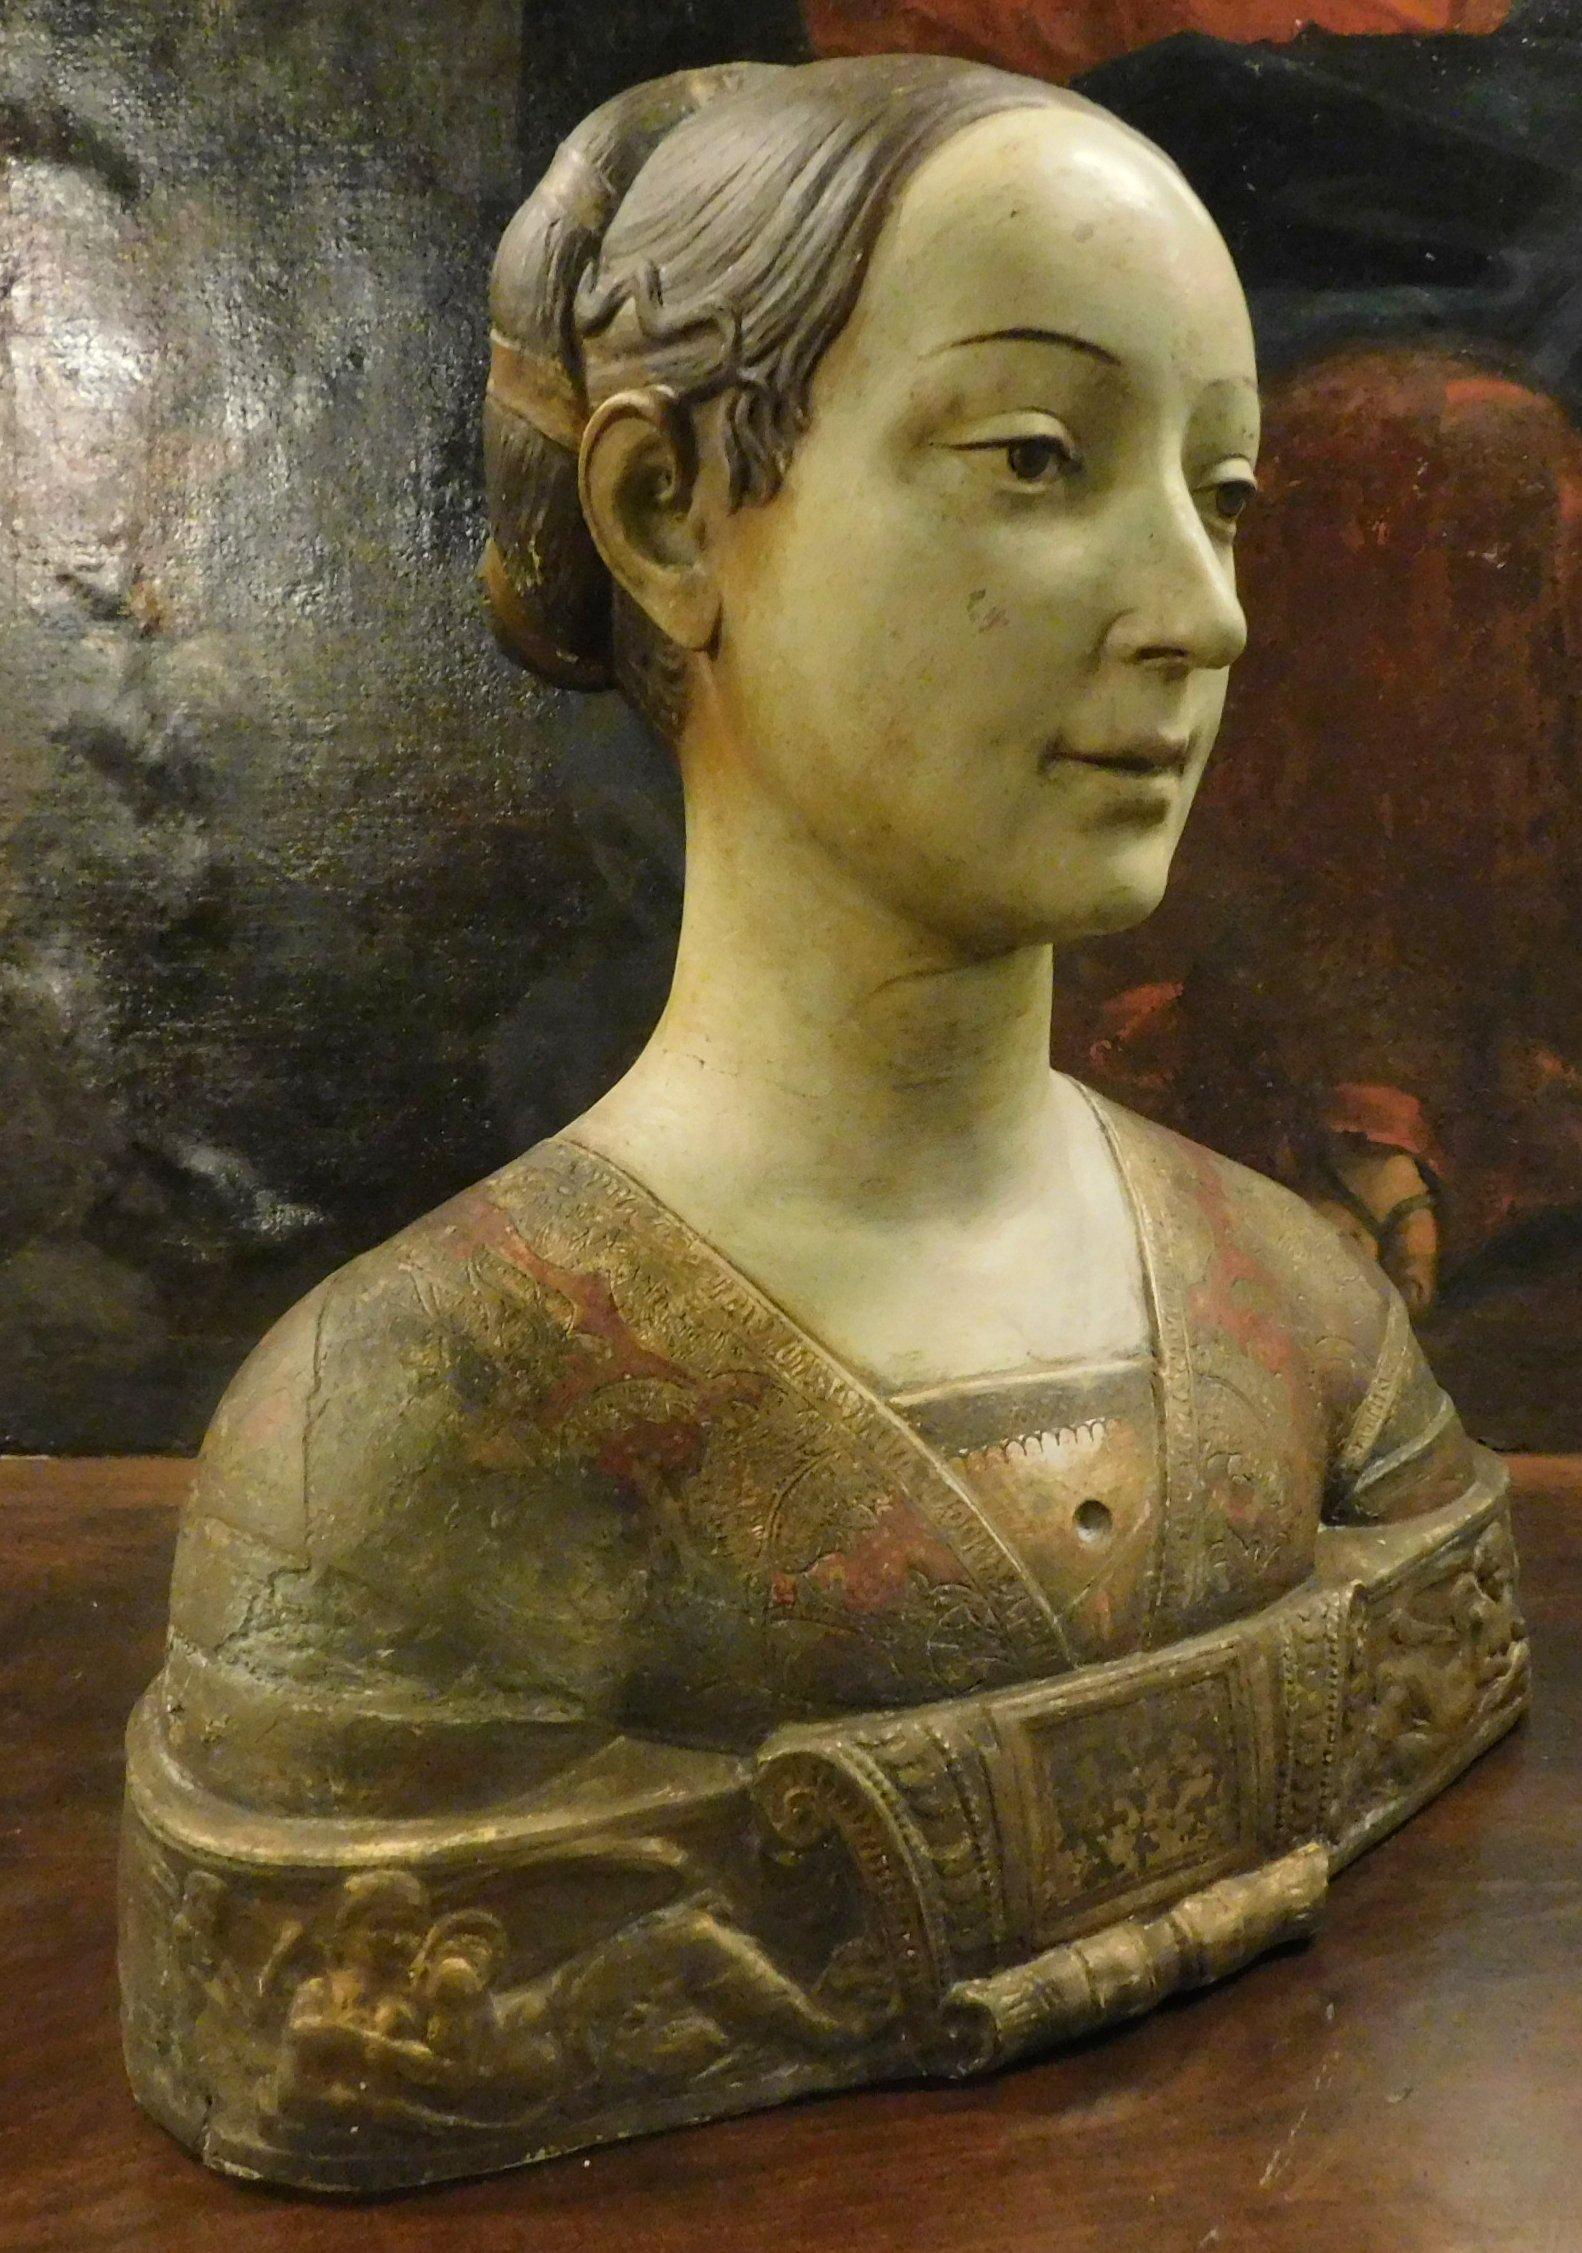 19th Century Antique Bust of a Florentine Noblewoman Terracotta Sculpture Statue, 1800 Italy